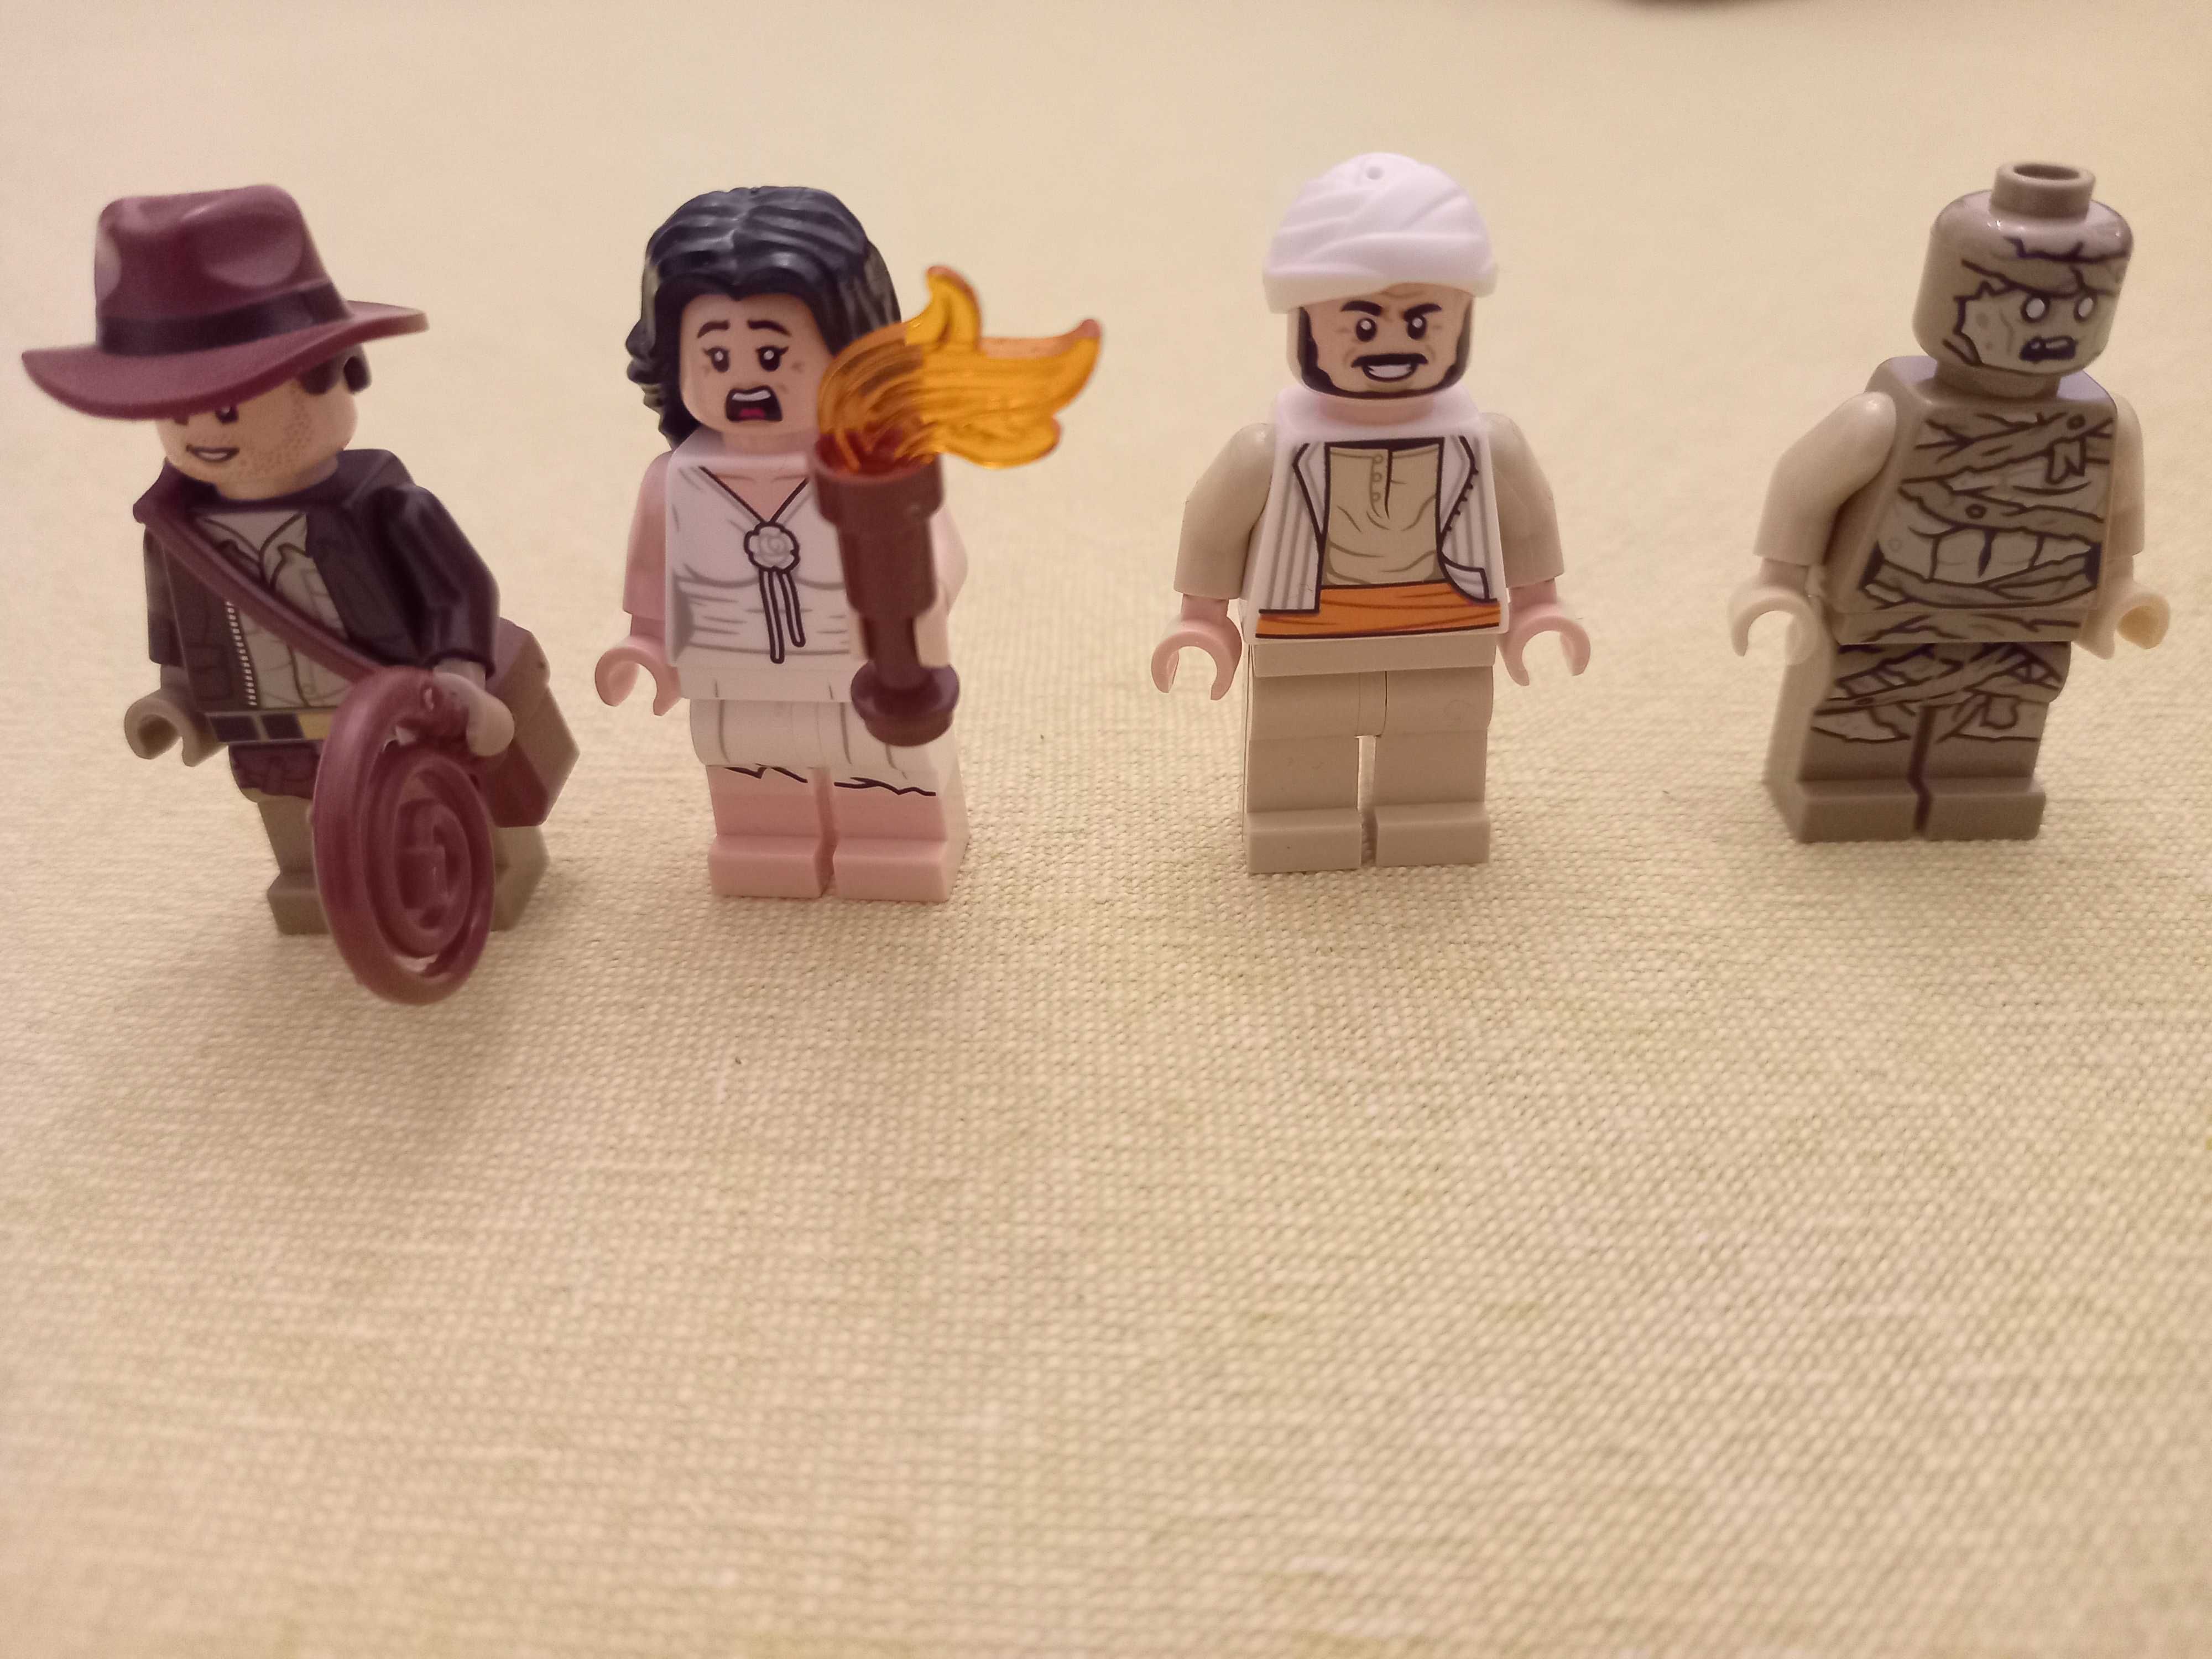 Lego 77013 - Indiana Jones: Escape from the Lost Tomb